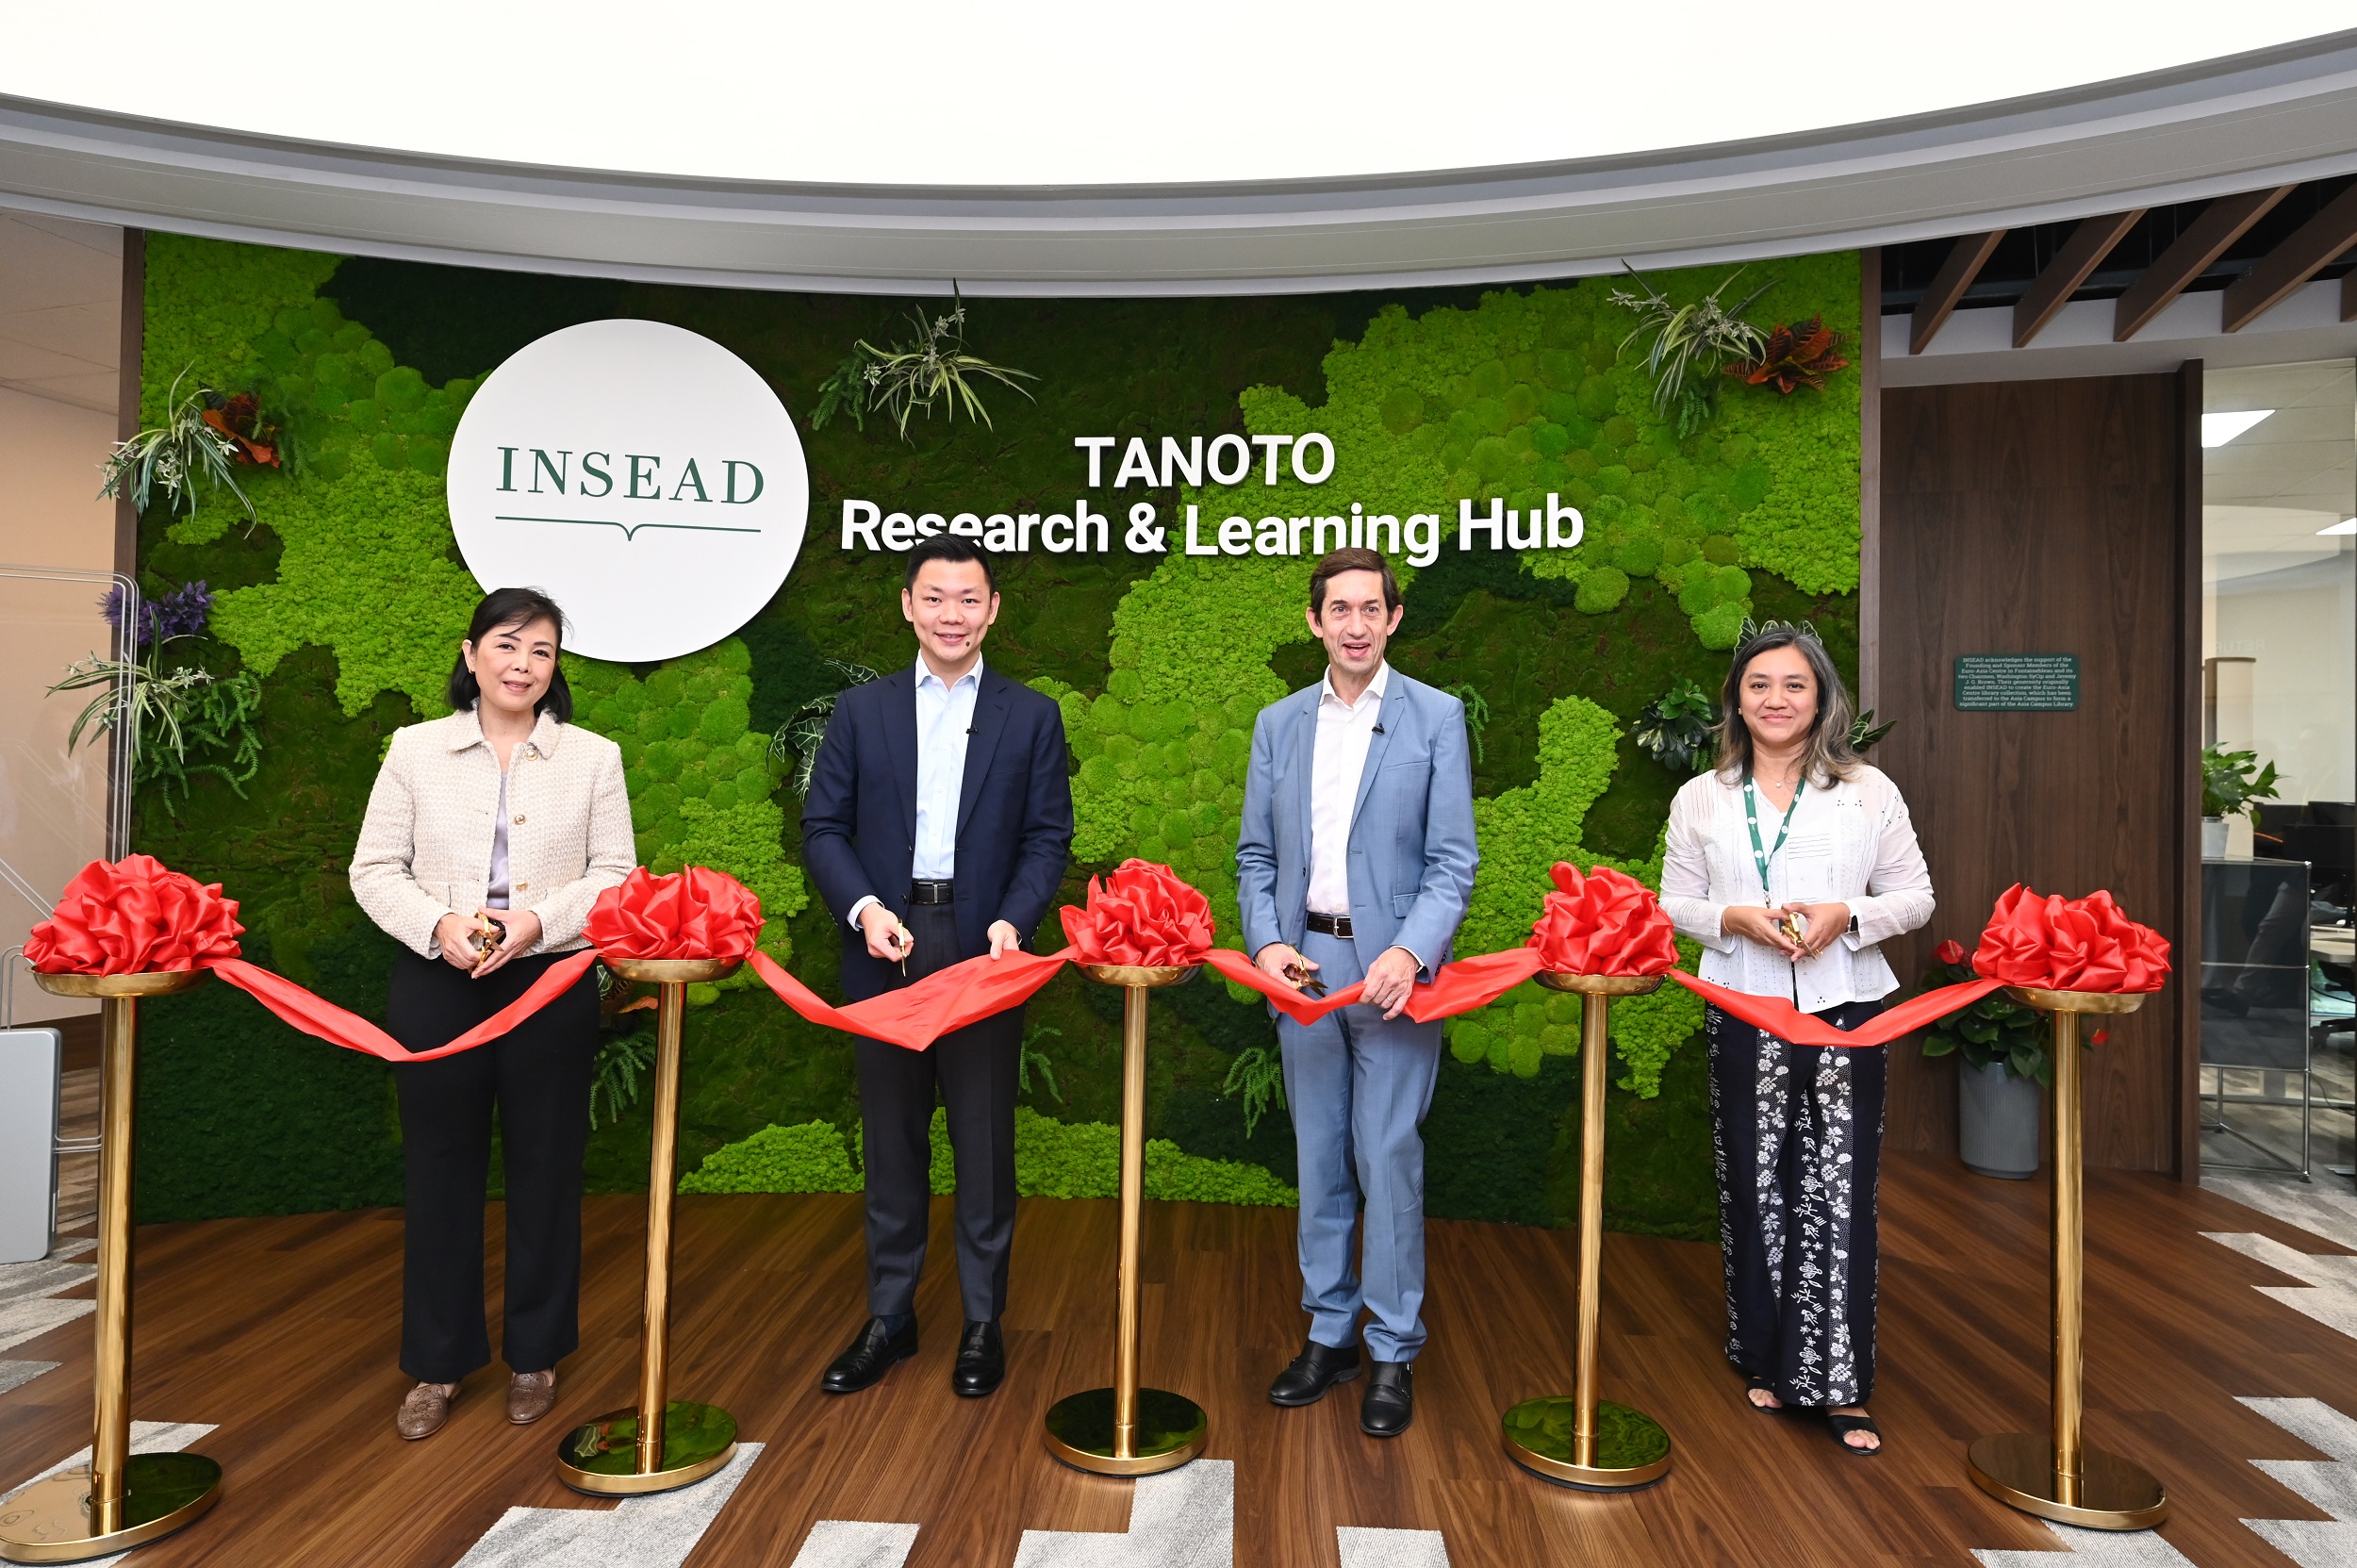 (From left to right) Ms Inge Sanitasia Kusuma, Country Head of Tanoto Foundation Indonesia, Mr Anderson Tanoto, Member of the Board of Trustees, Tanoto Foundation, Professor Francisco Veloso, Dean of INSEAD, and Ms Yuhanis Yusoff, Head of Tanoto Research and Learning Hub, at the inauguration of the Tanoto Research and Learning Hub, INSEAD Asia Campus